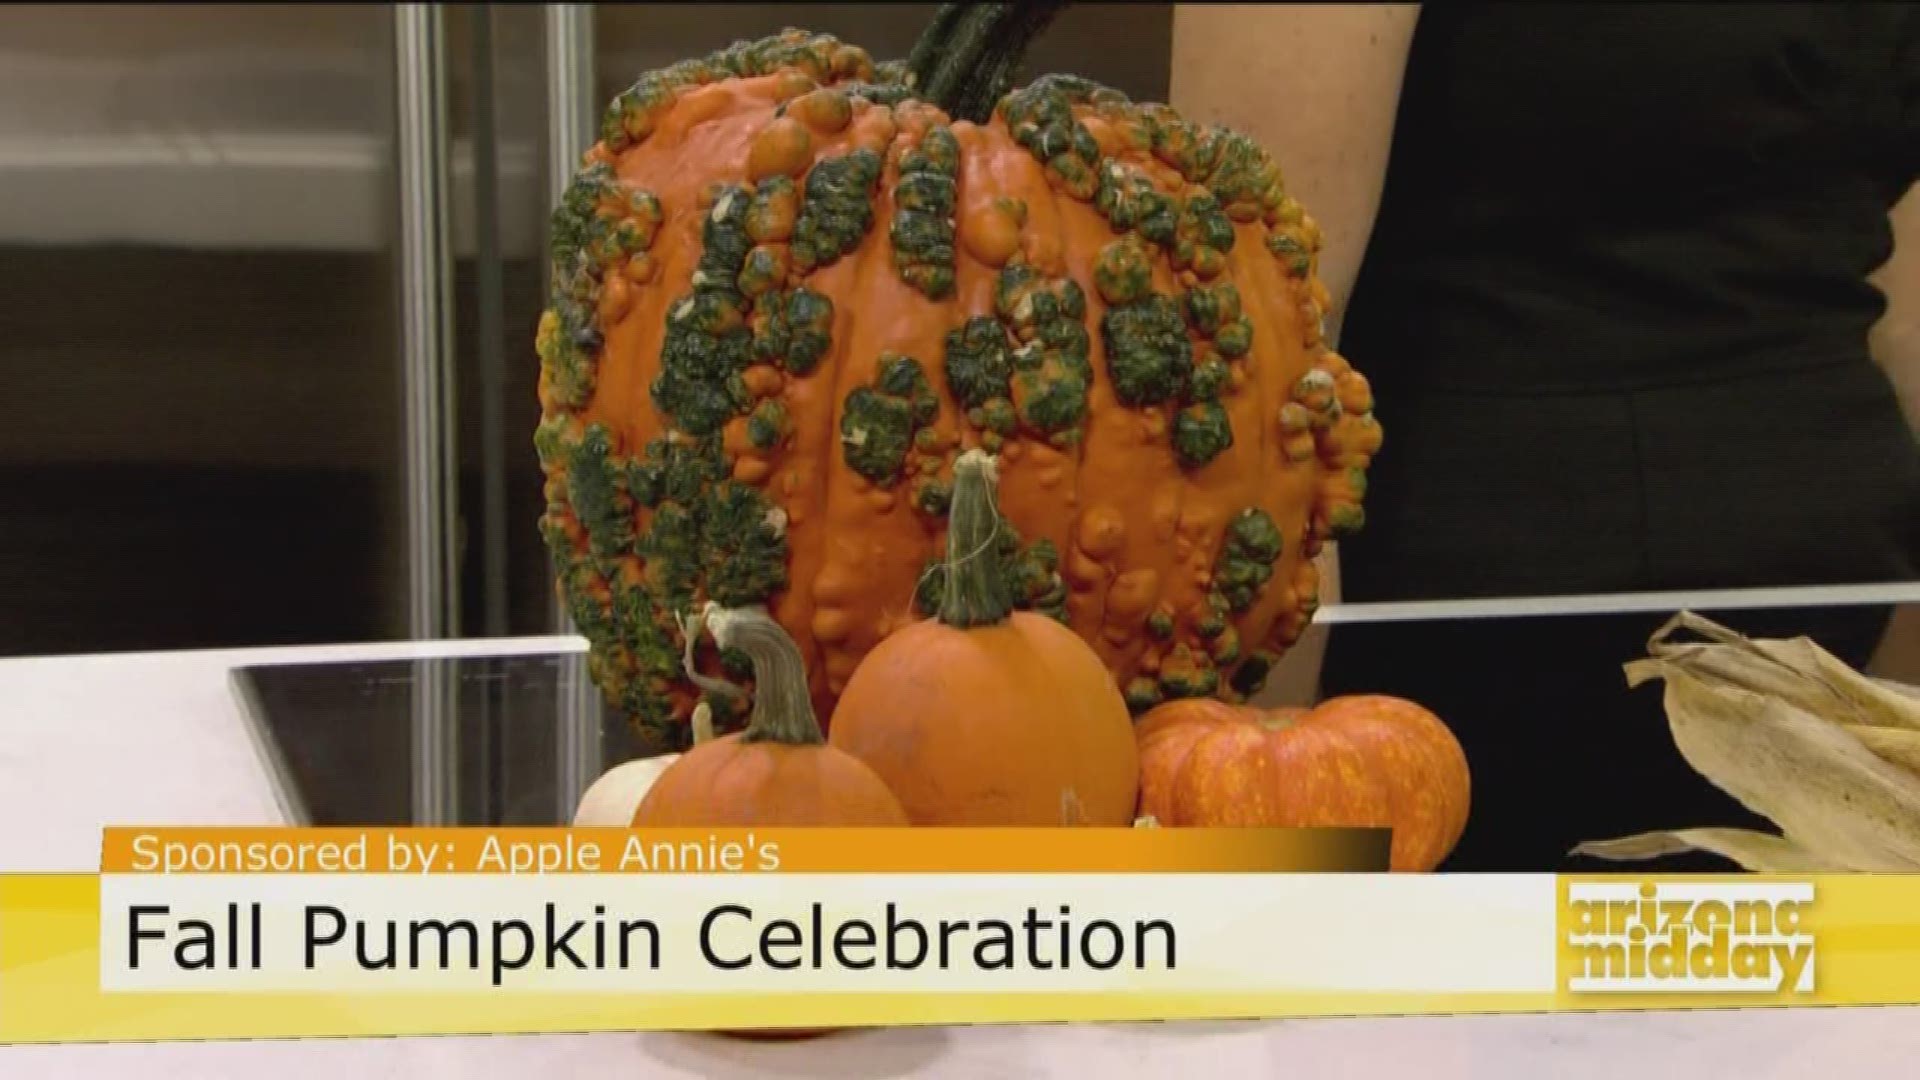 Mandy from Apple Annie's Farm talks to us about the different activities you can do with the family at the Pumpkin Celebration going on from now through October 28th!